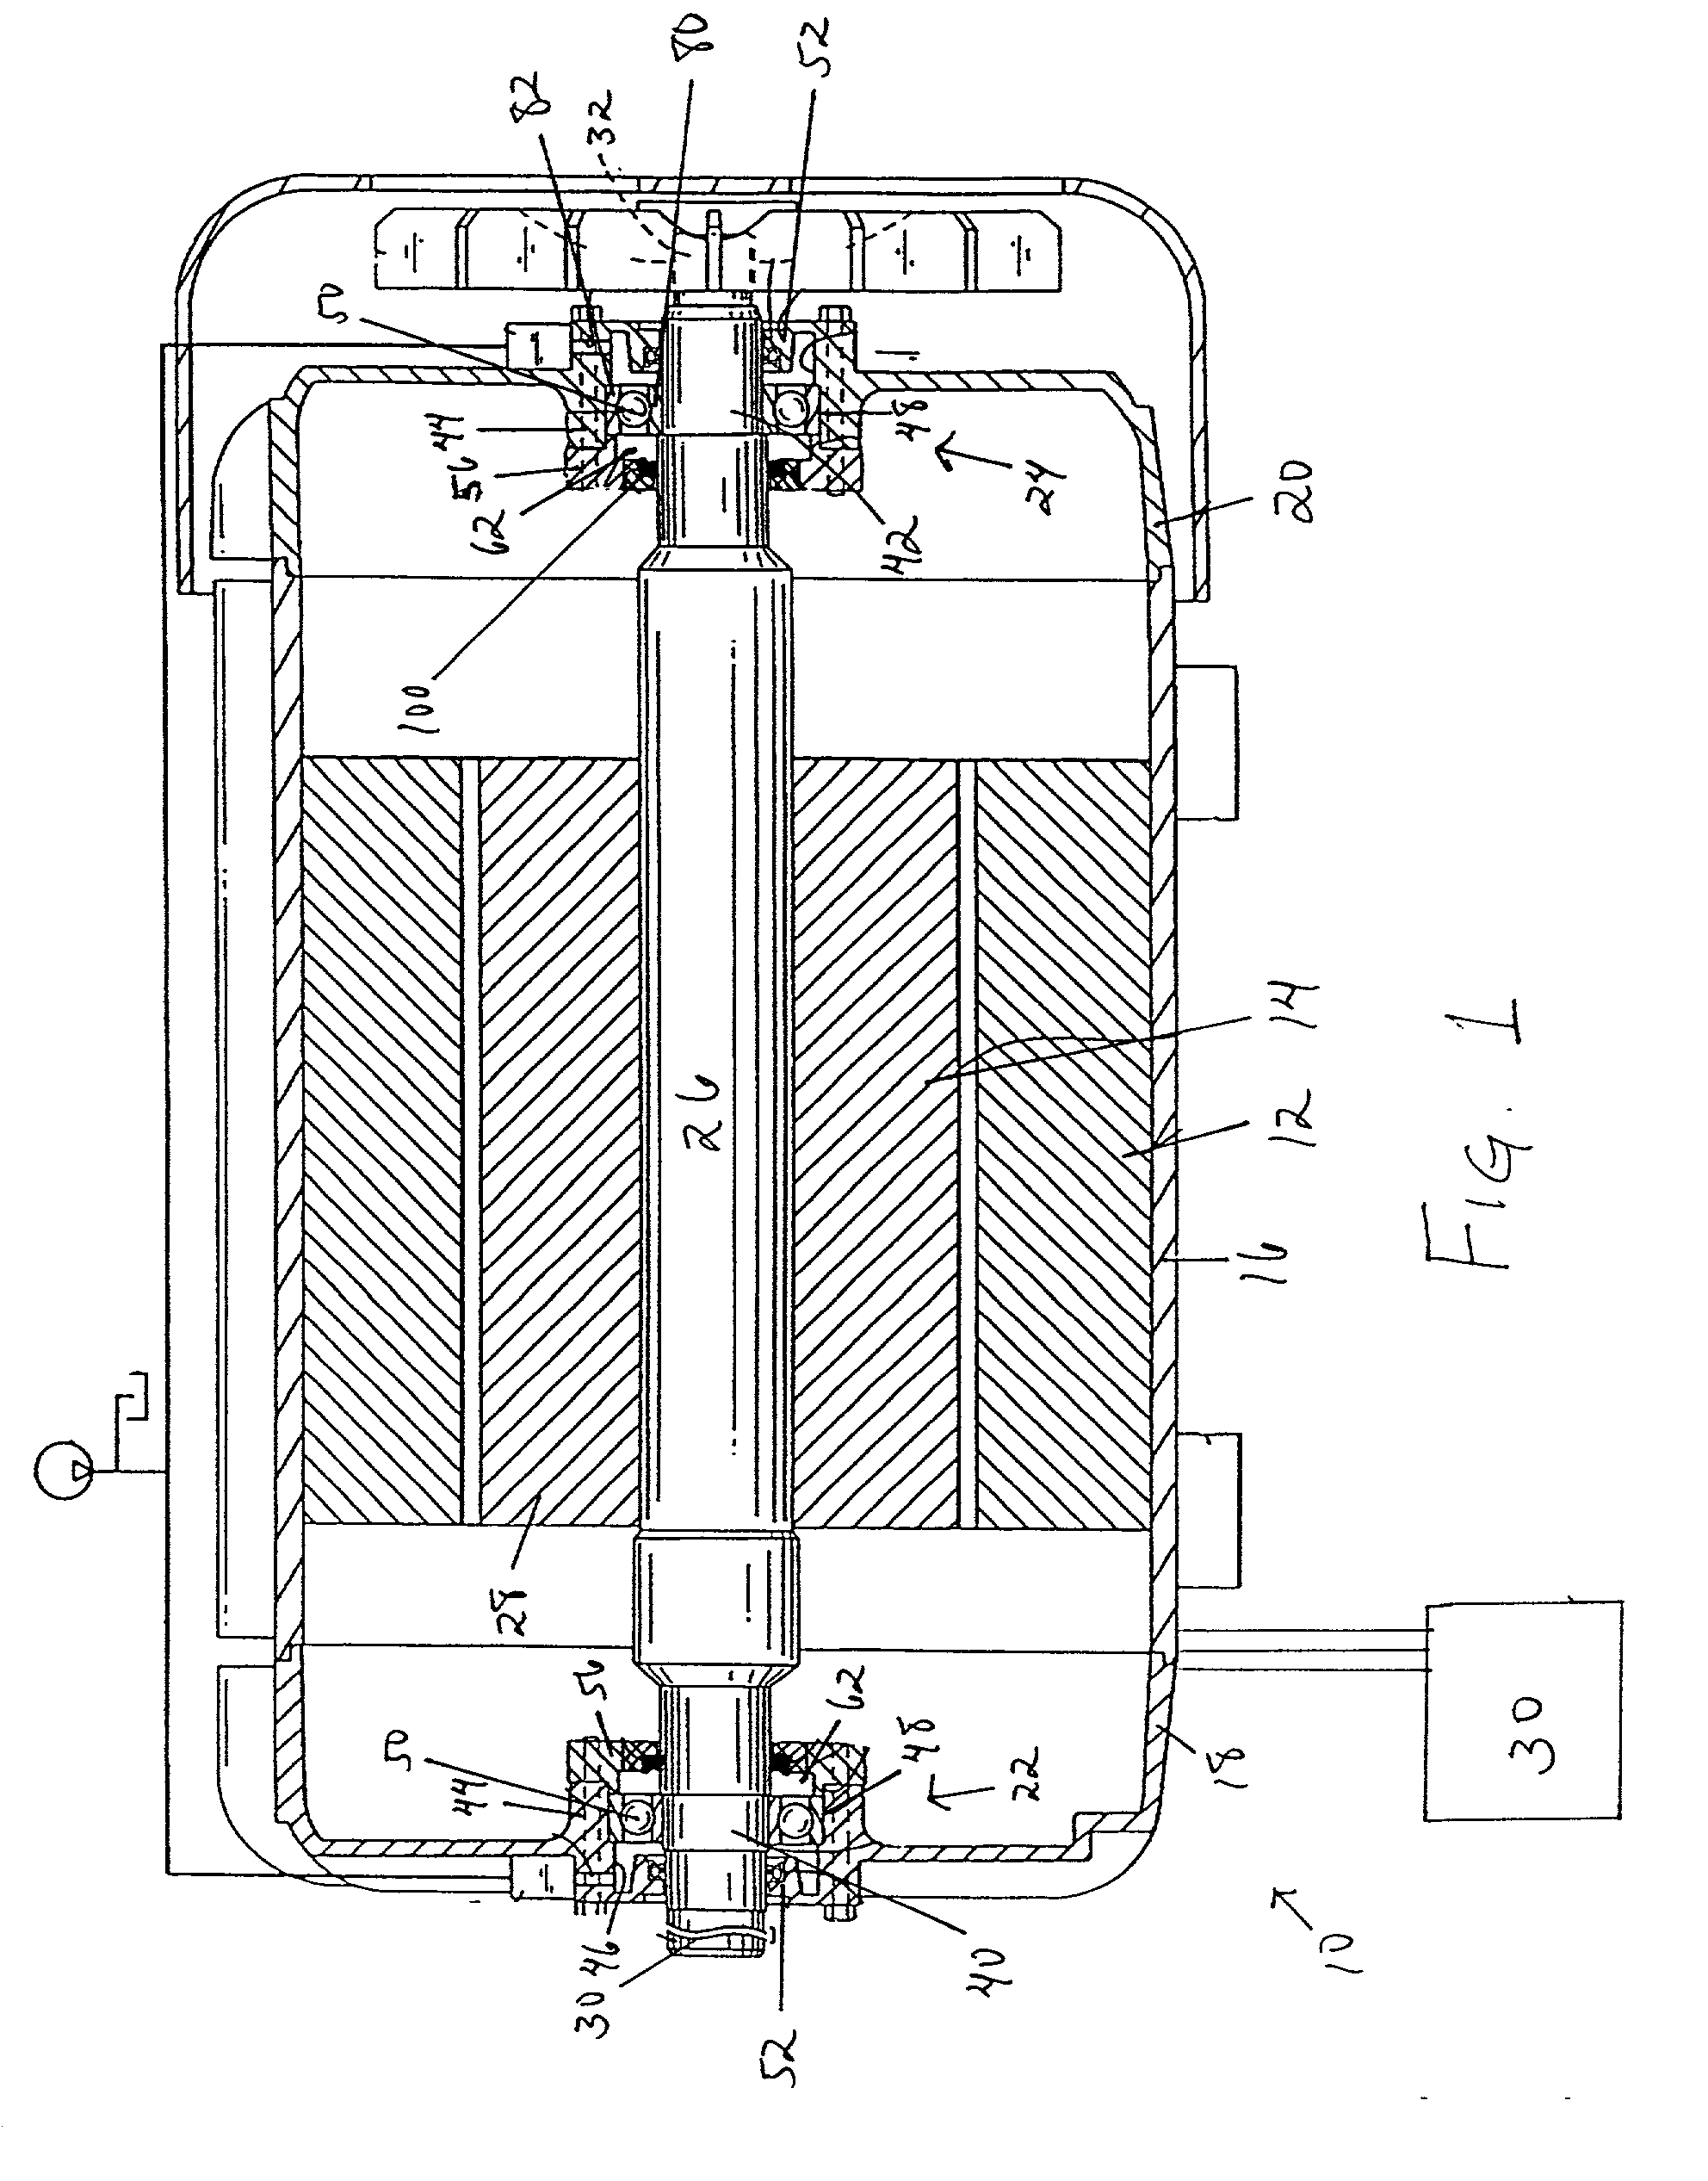 System and method of reducing bearing voltage